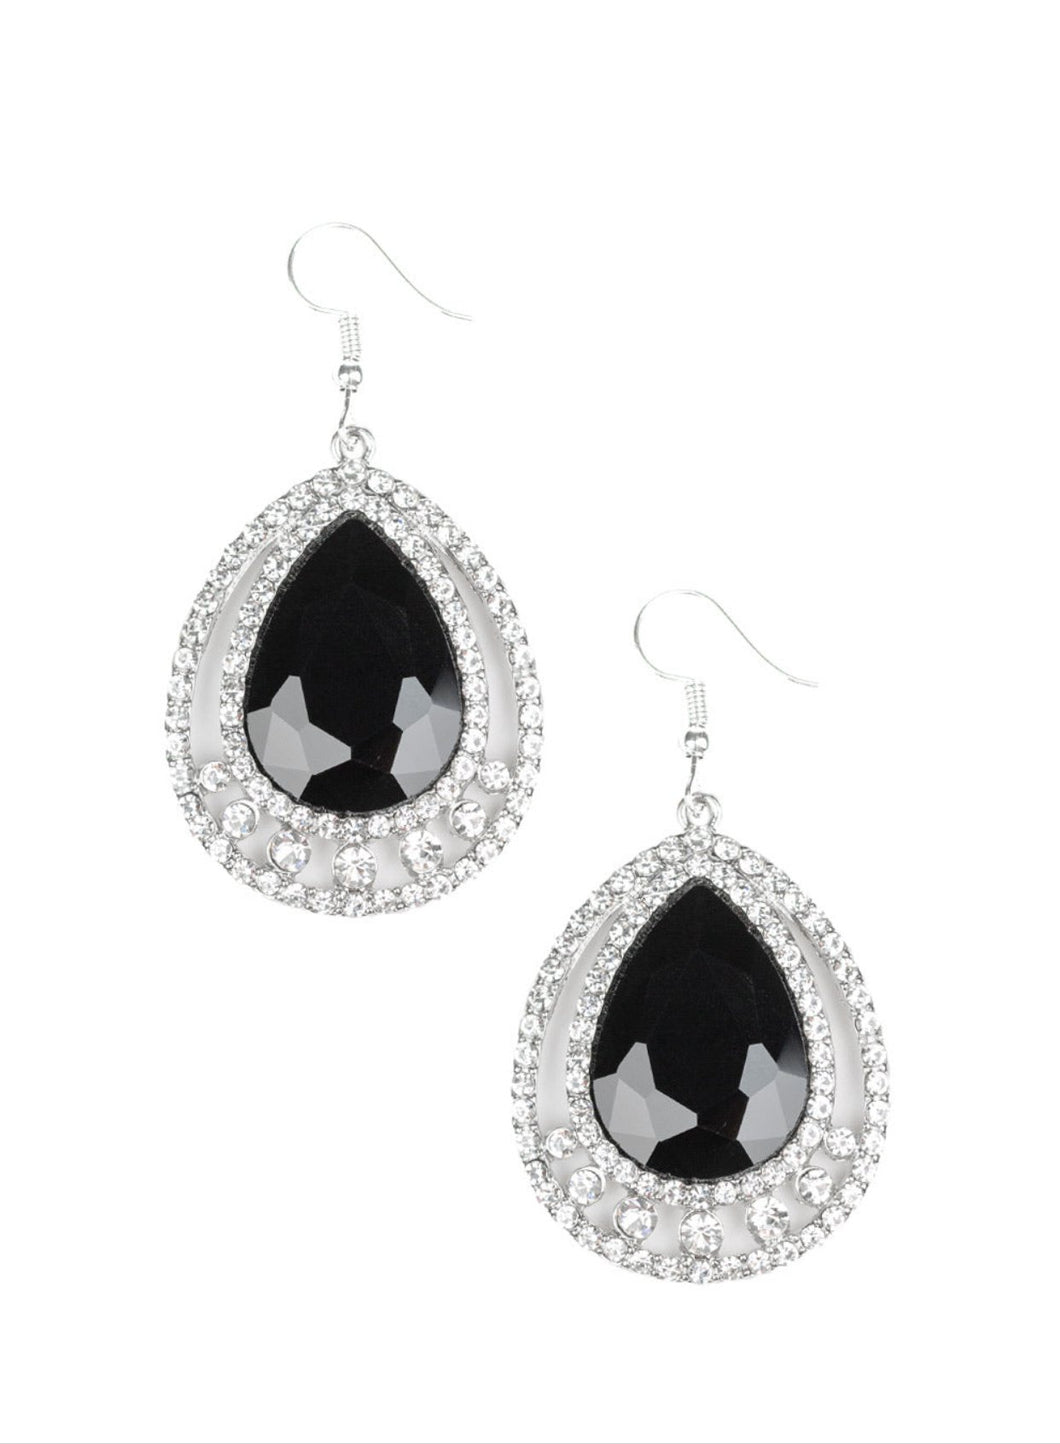 All Rise For Her Majesty Black and Bling Earrings